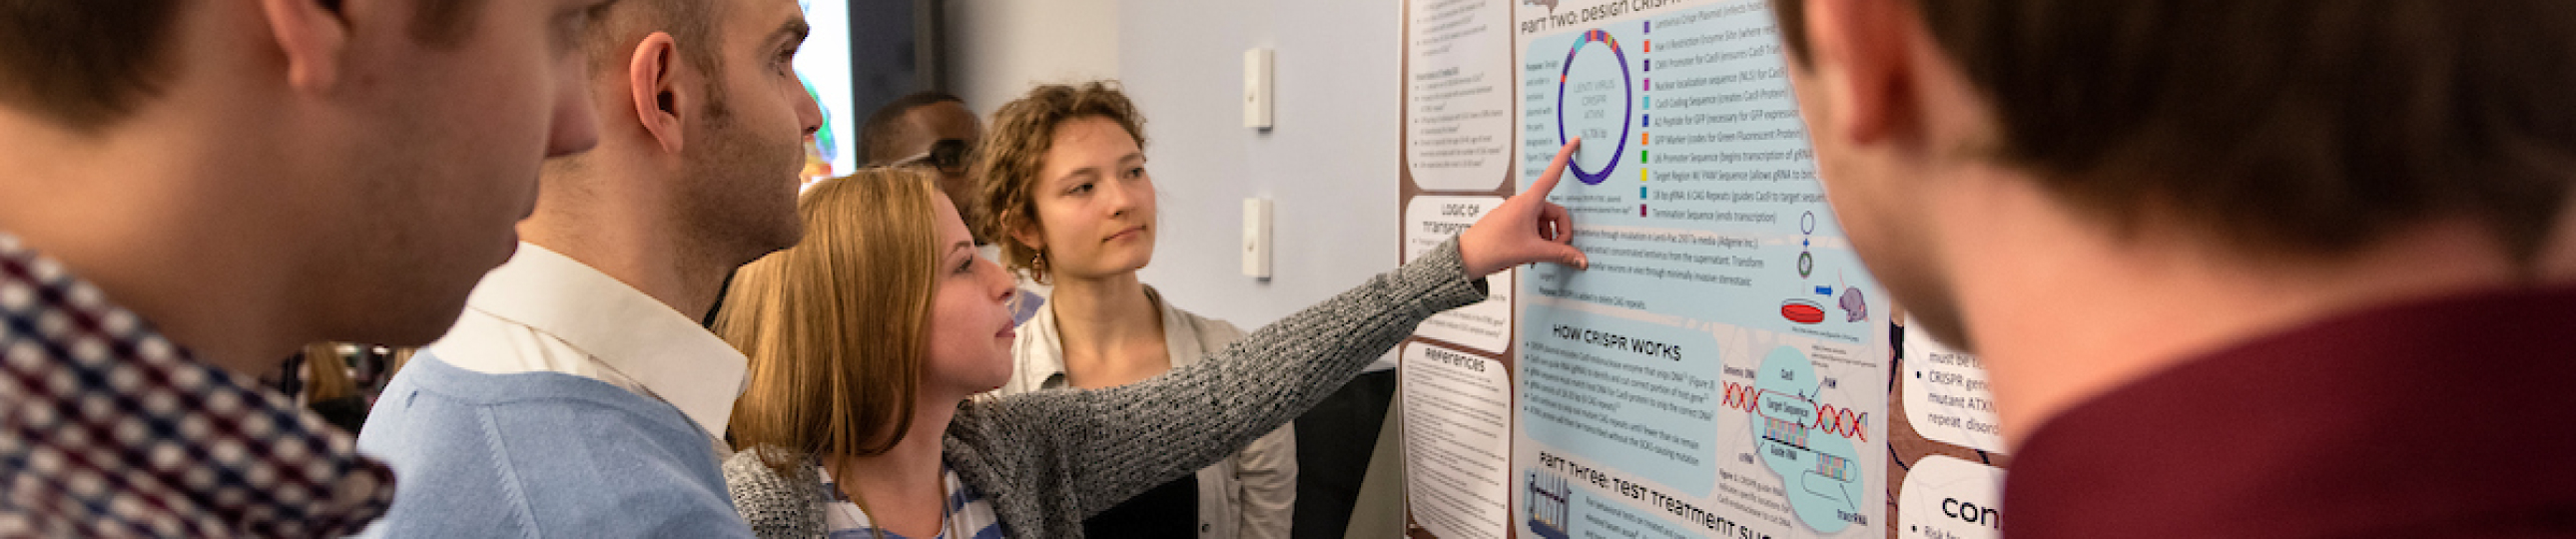 student pointing at research poster with group of students listening